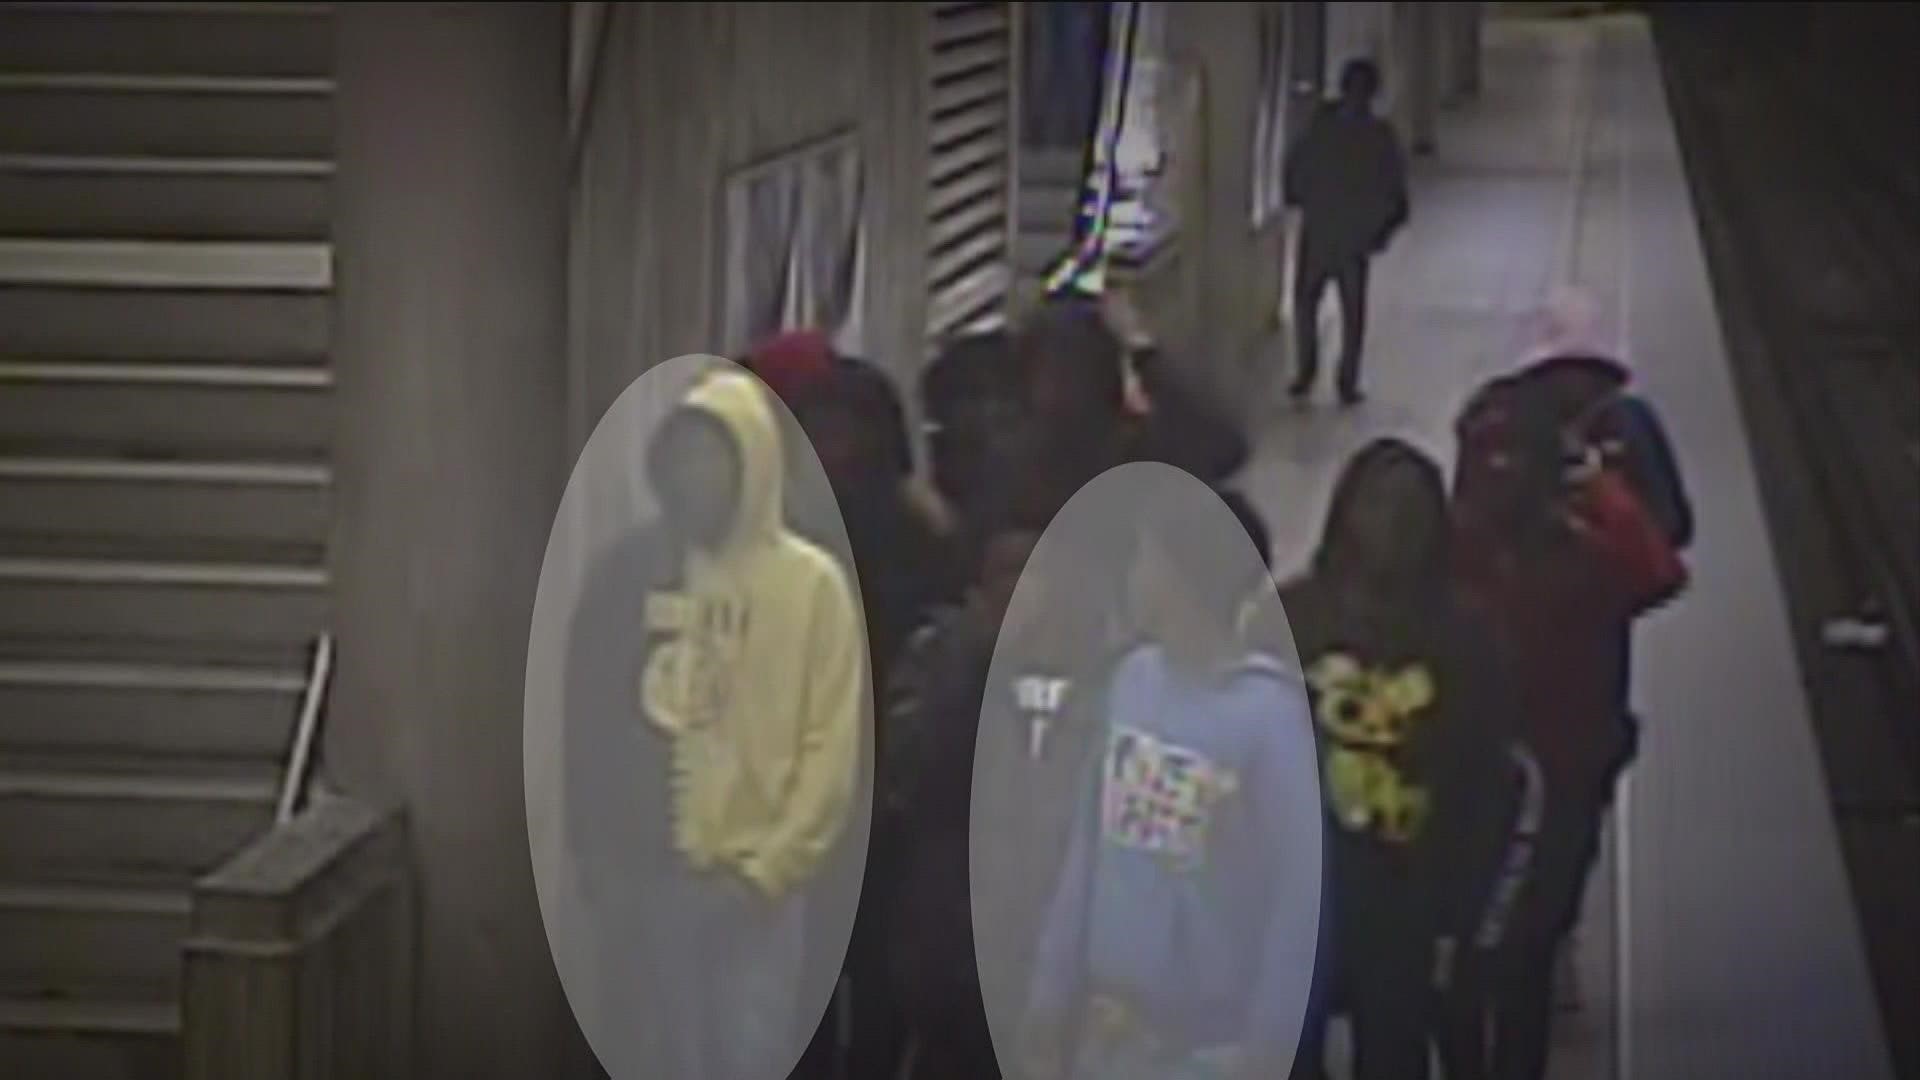 Police said the boys highlighted in the video are those suspected to be behind the shooting.